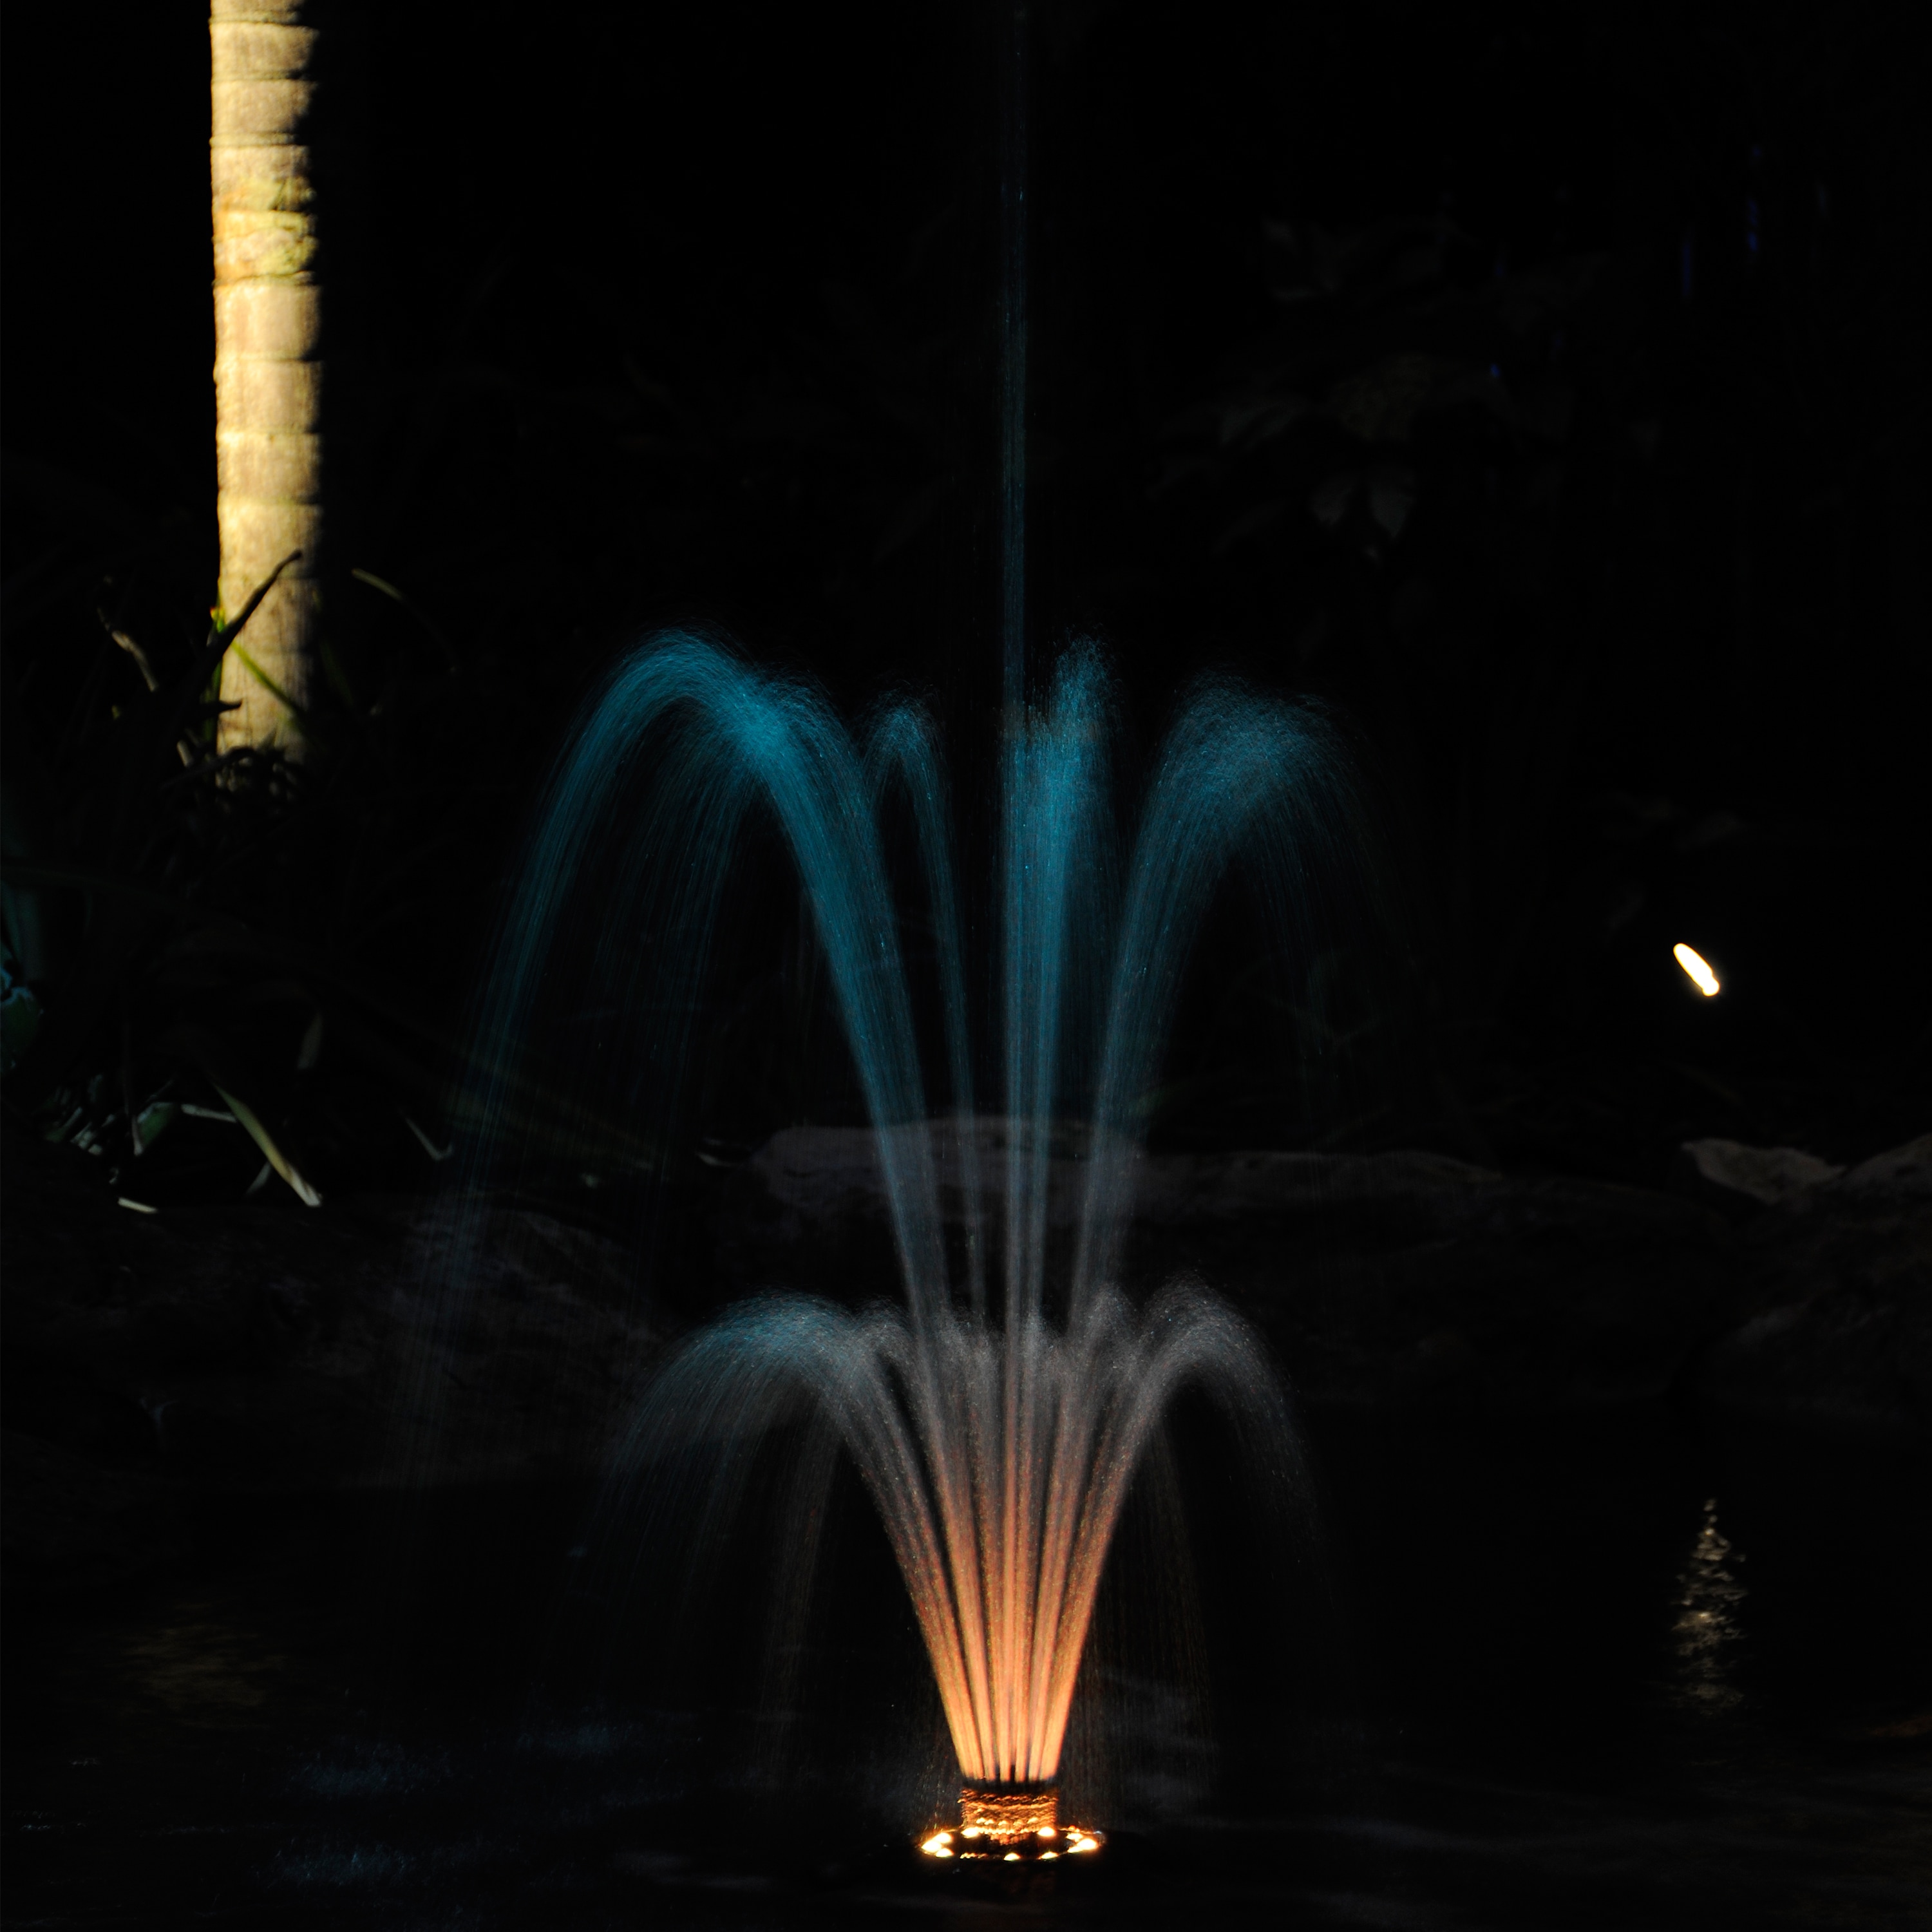 LED Pool Or Pond Floating Water Fountain Color Changing or All White 600GPH pump 